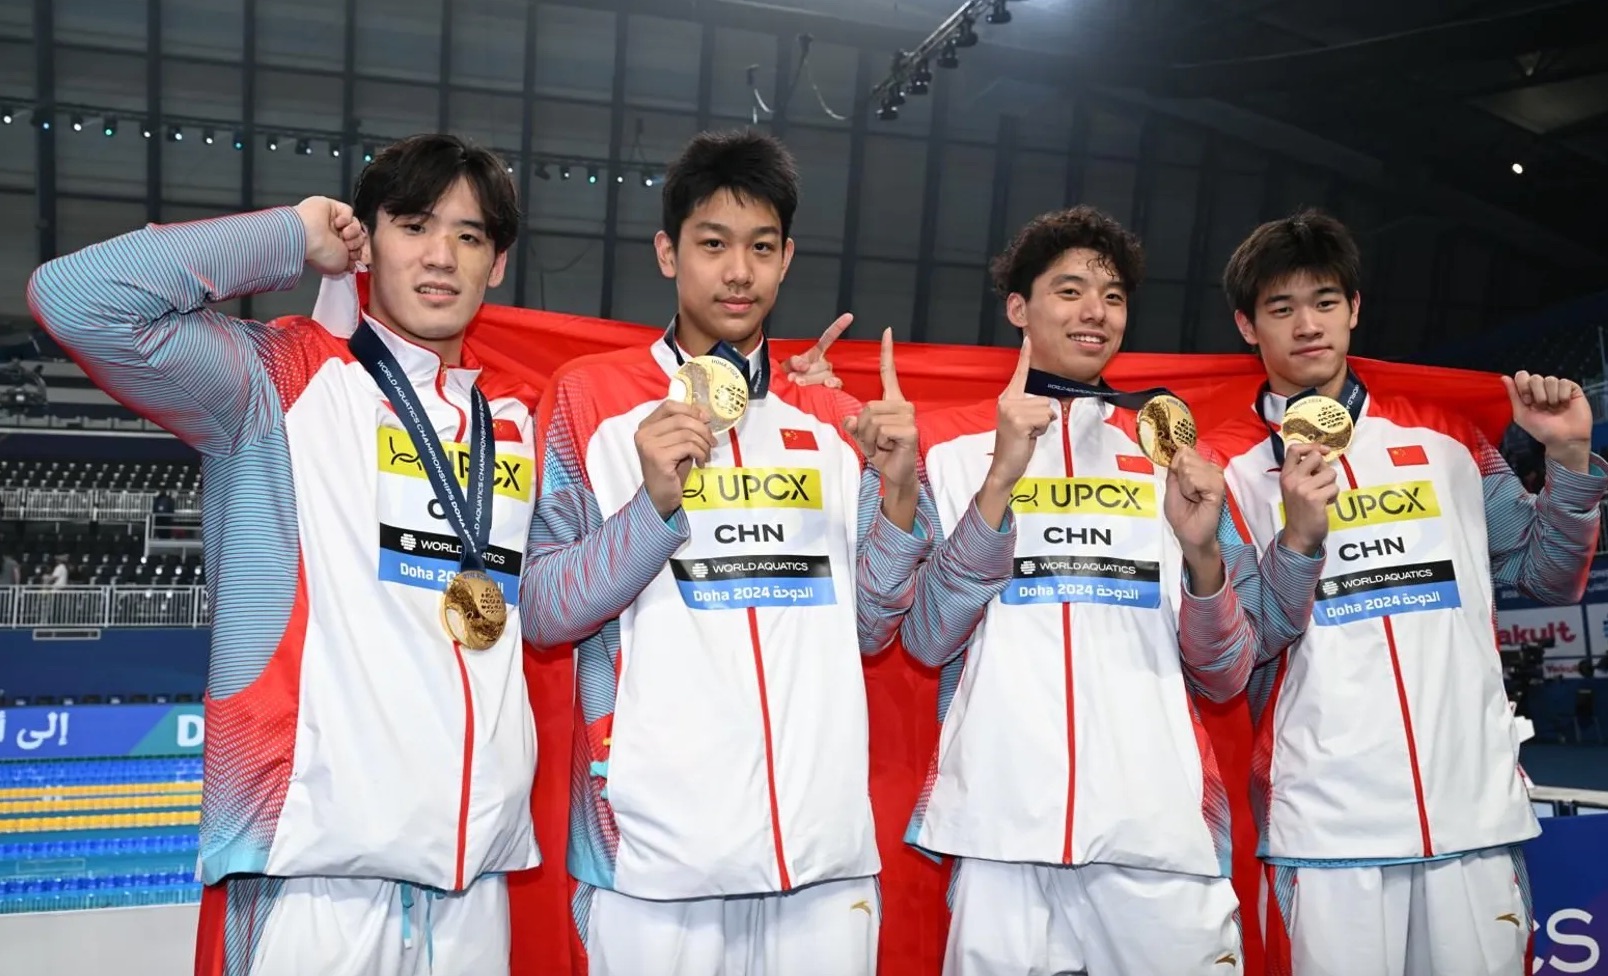 China's Wang Haoyu, Zhang Zhanshuo, Ji Xinjie and Pan Zhanle (L-R) hold up their gold medals after winning the men's 4x100m freestyle relay final at the World Aquatics Championships in Doha, Qatar, February 11, 2024. /CFP